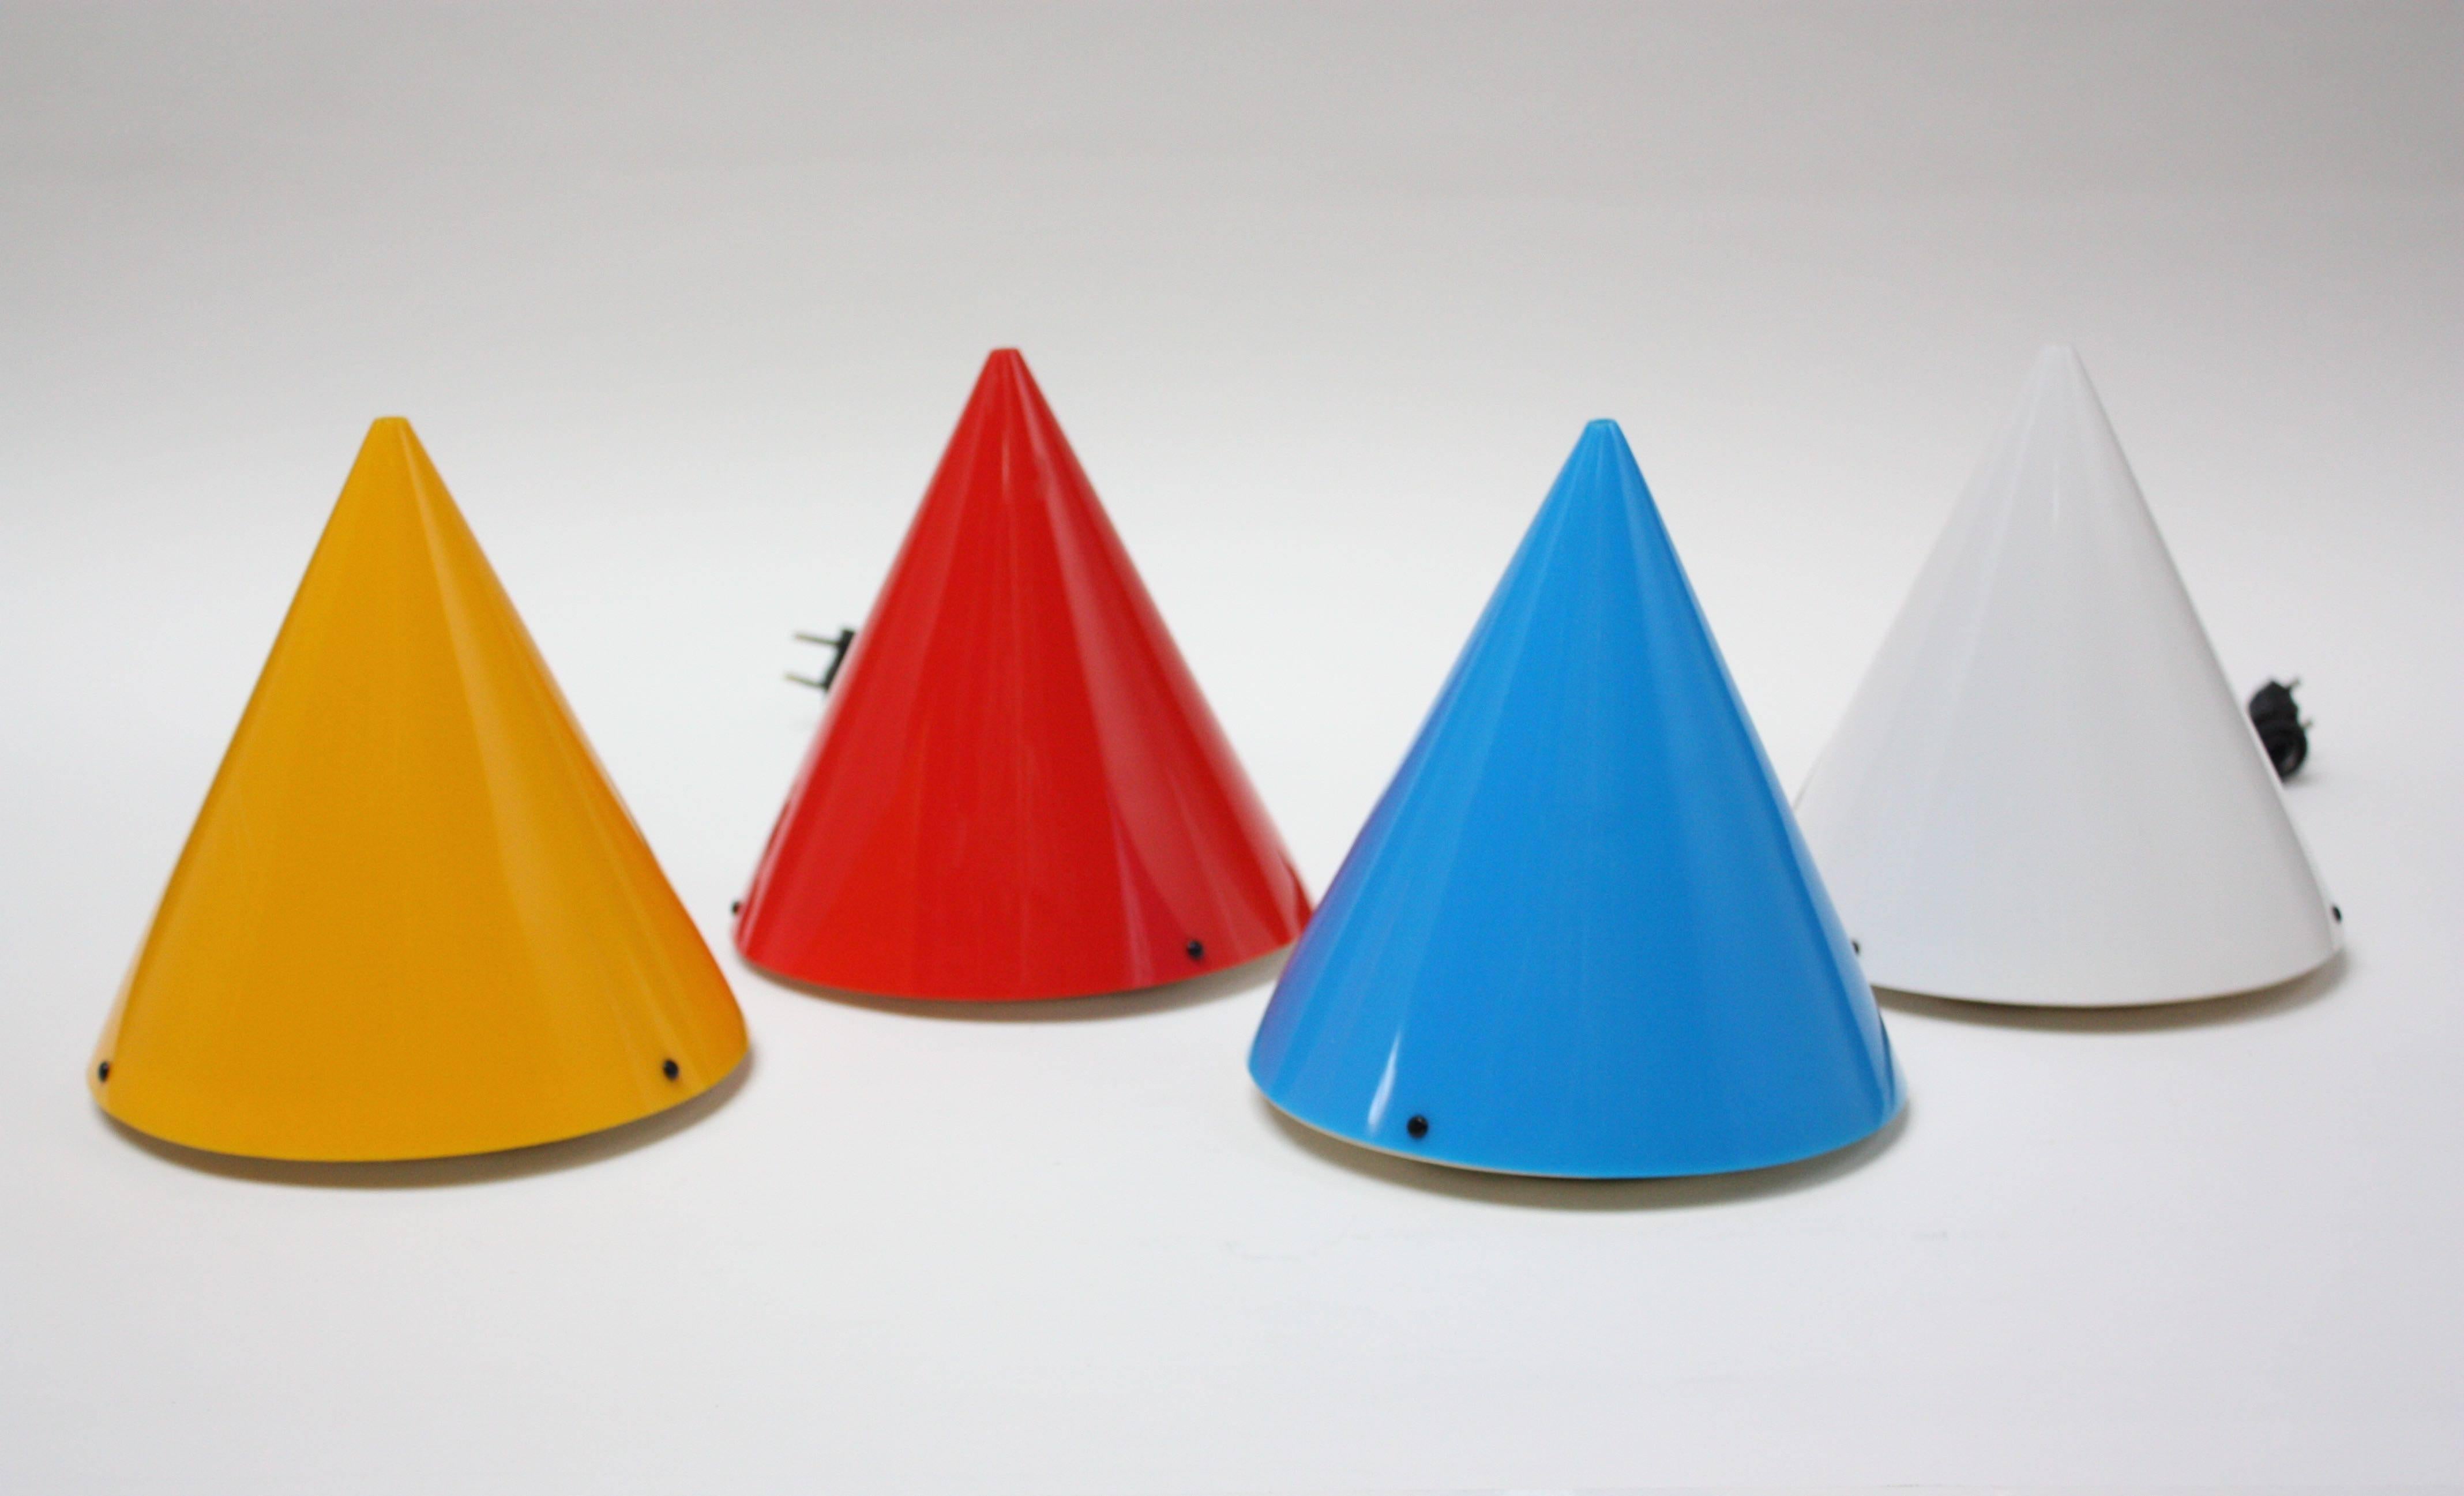 These four conical table or wall-mounted lights in blue, red, yellow and white were designed in 1995 by Verner Panton and produced by the company, Polythema, known for their work in acrylics. Three circular black screws mount each 'cone' to the